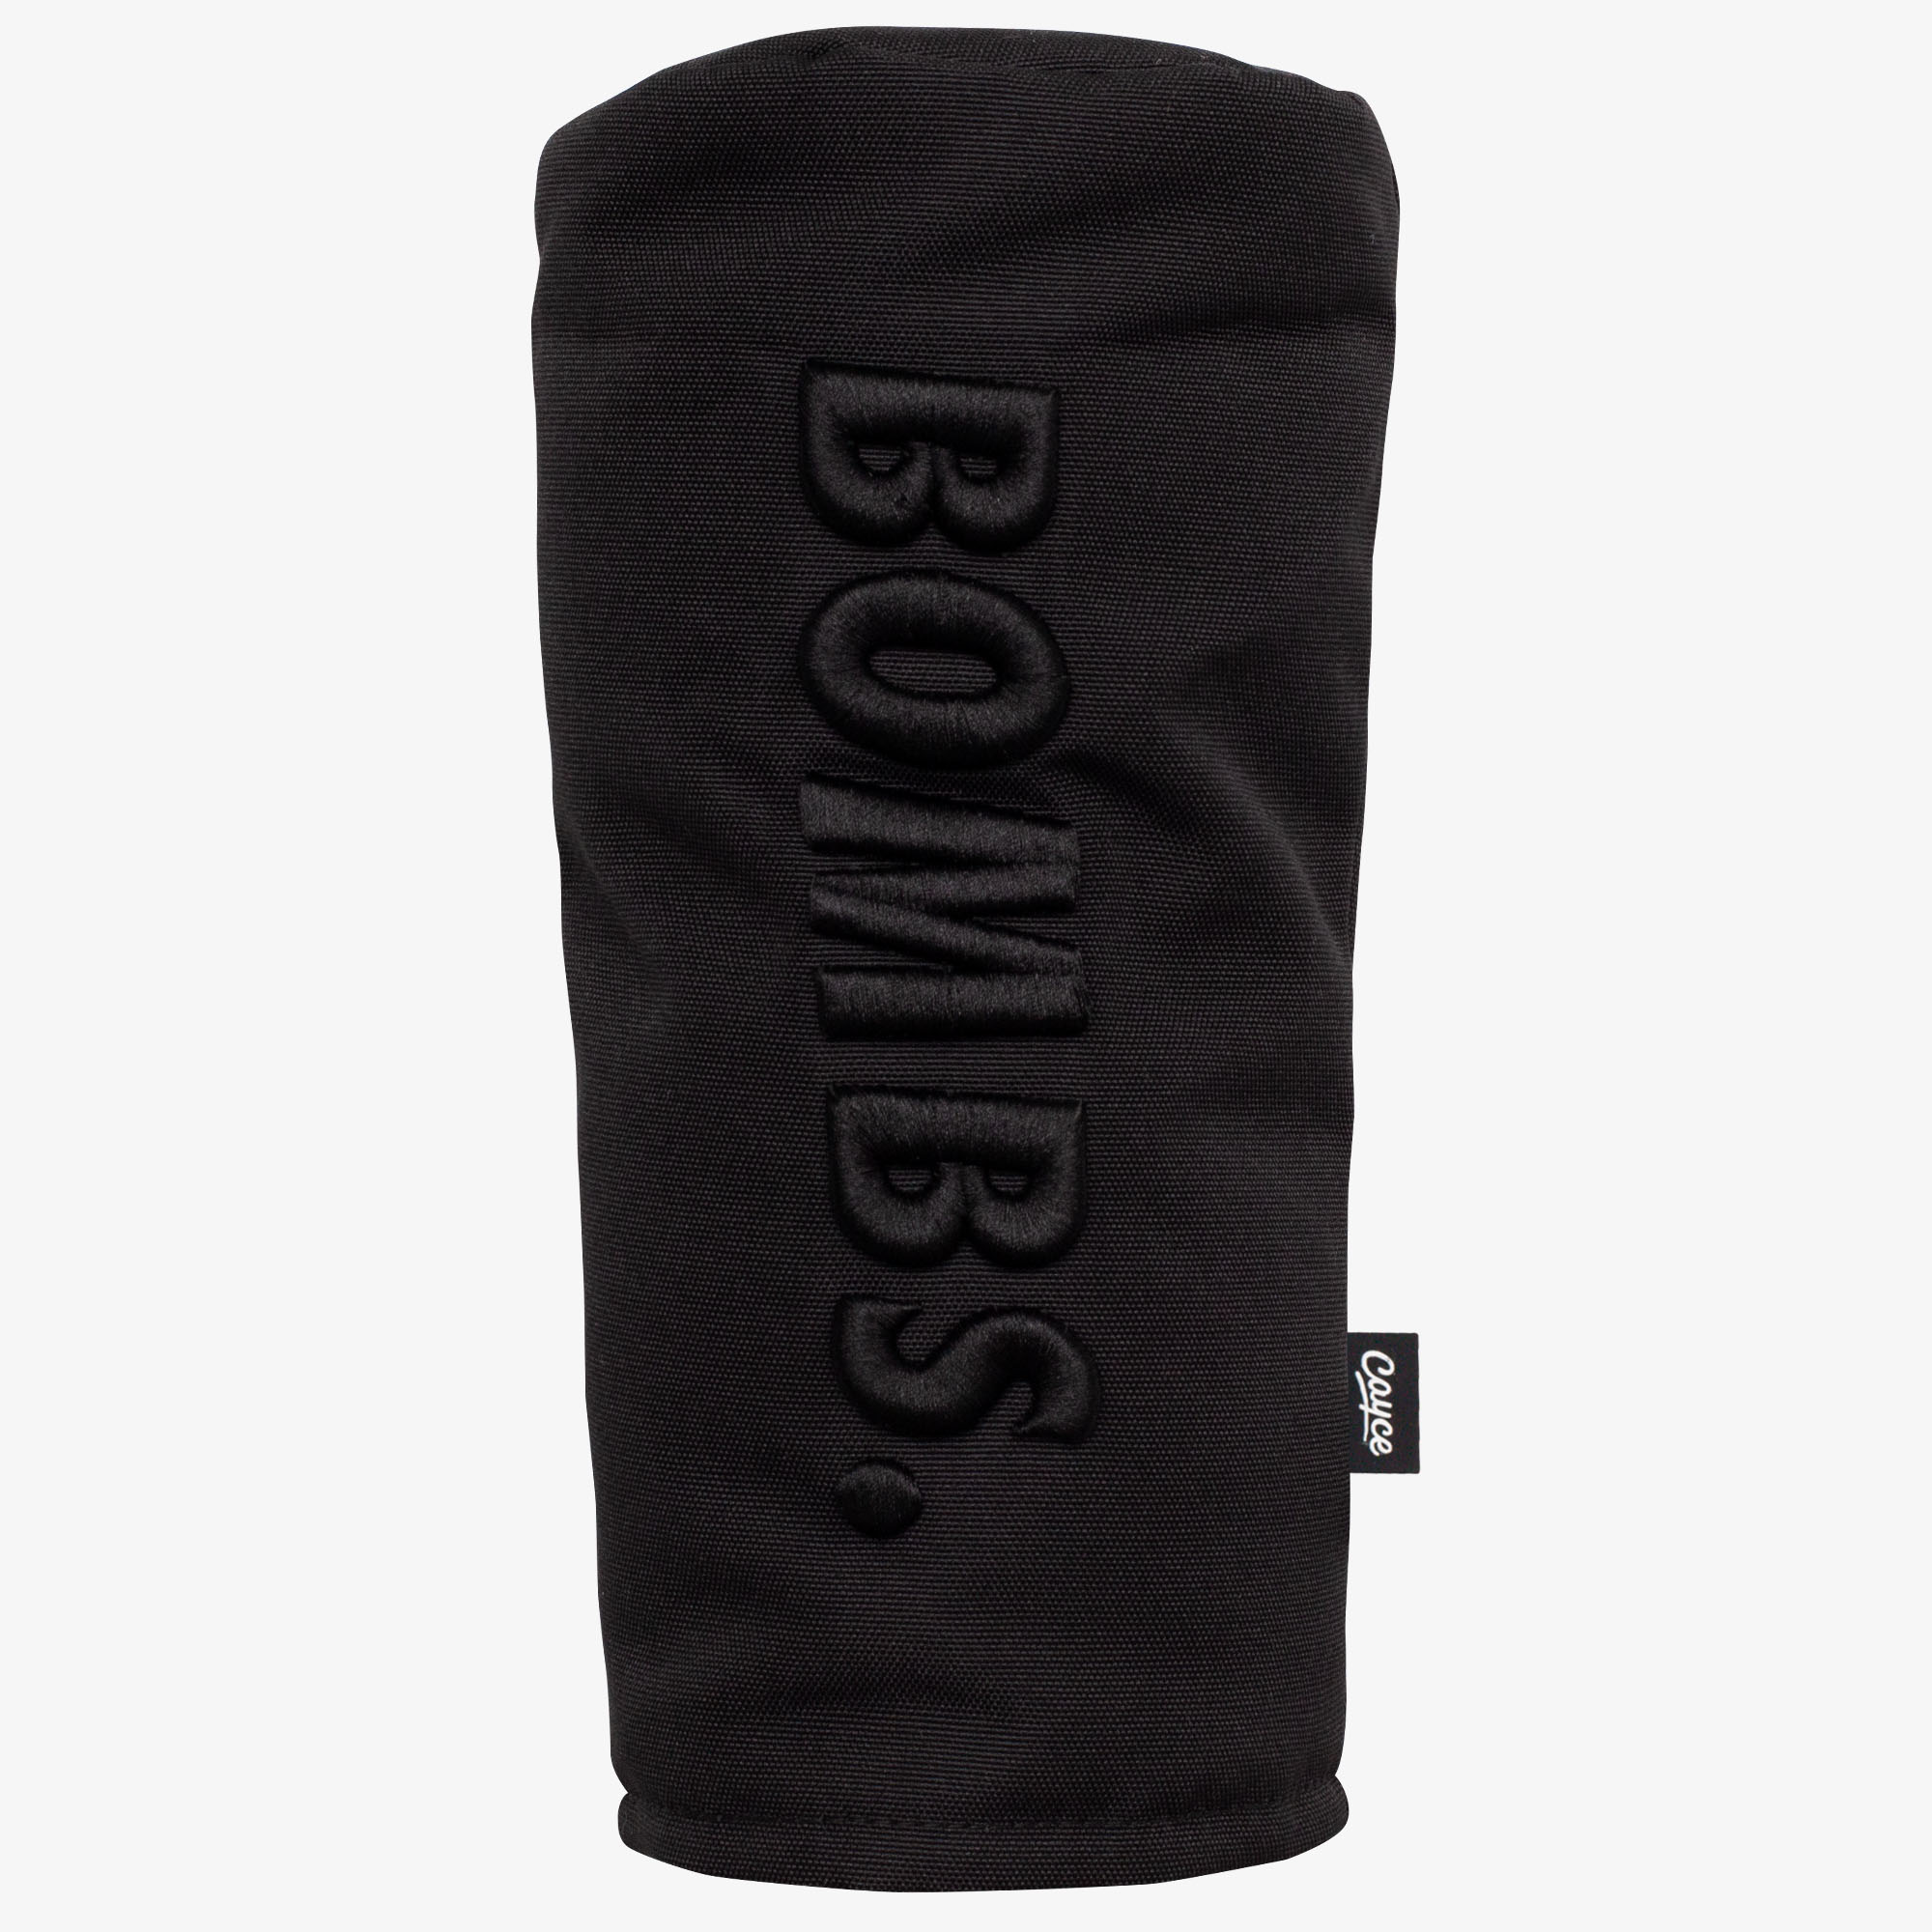 special edition black out version of the black Bombs driver head cover from cayce golf with black 3d puff embroidery